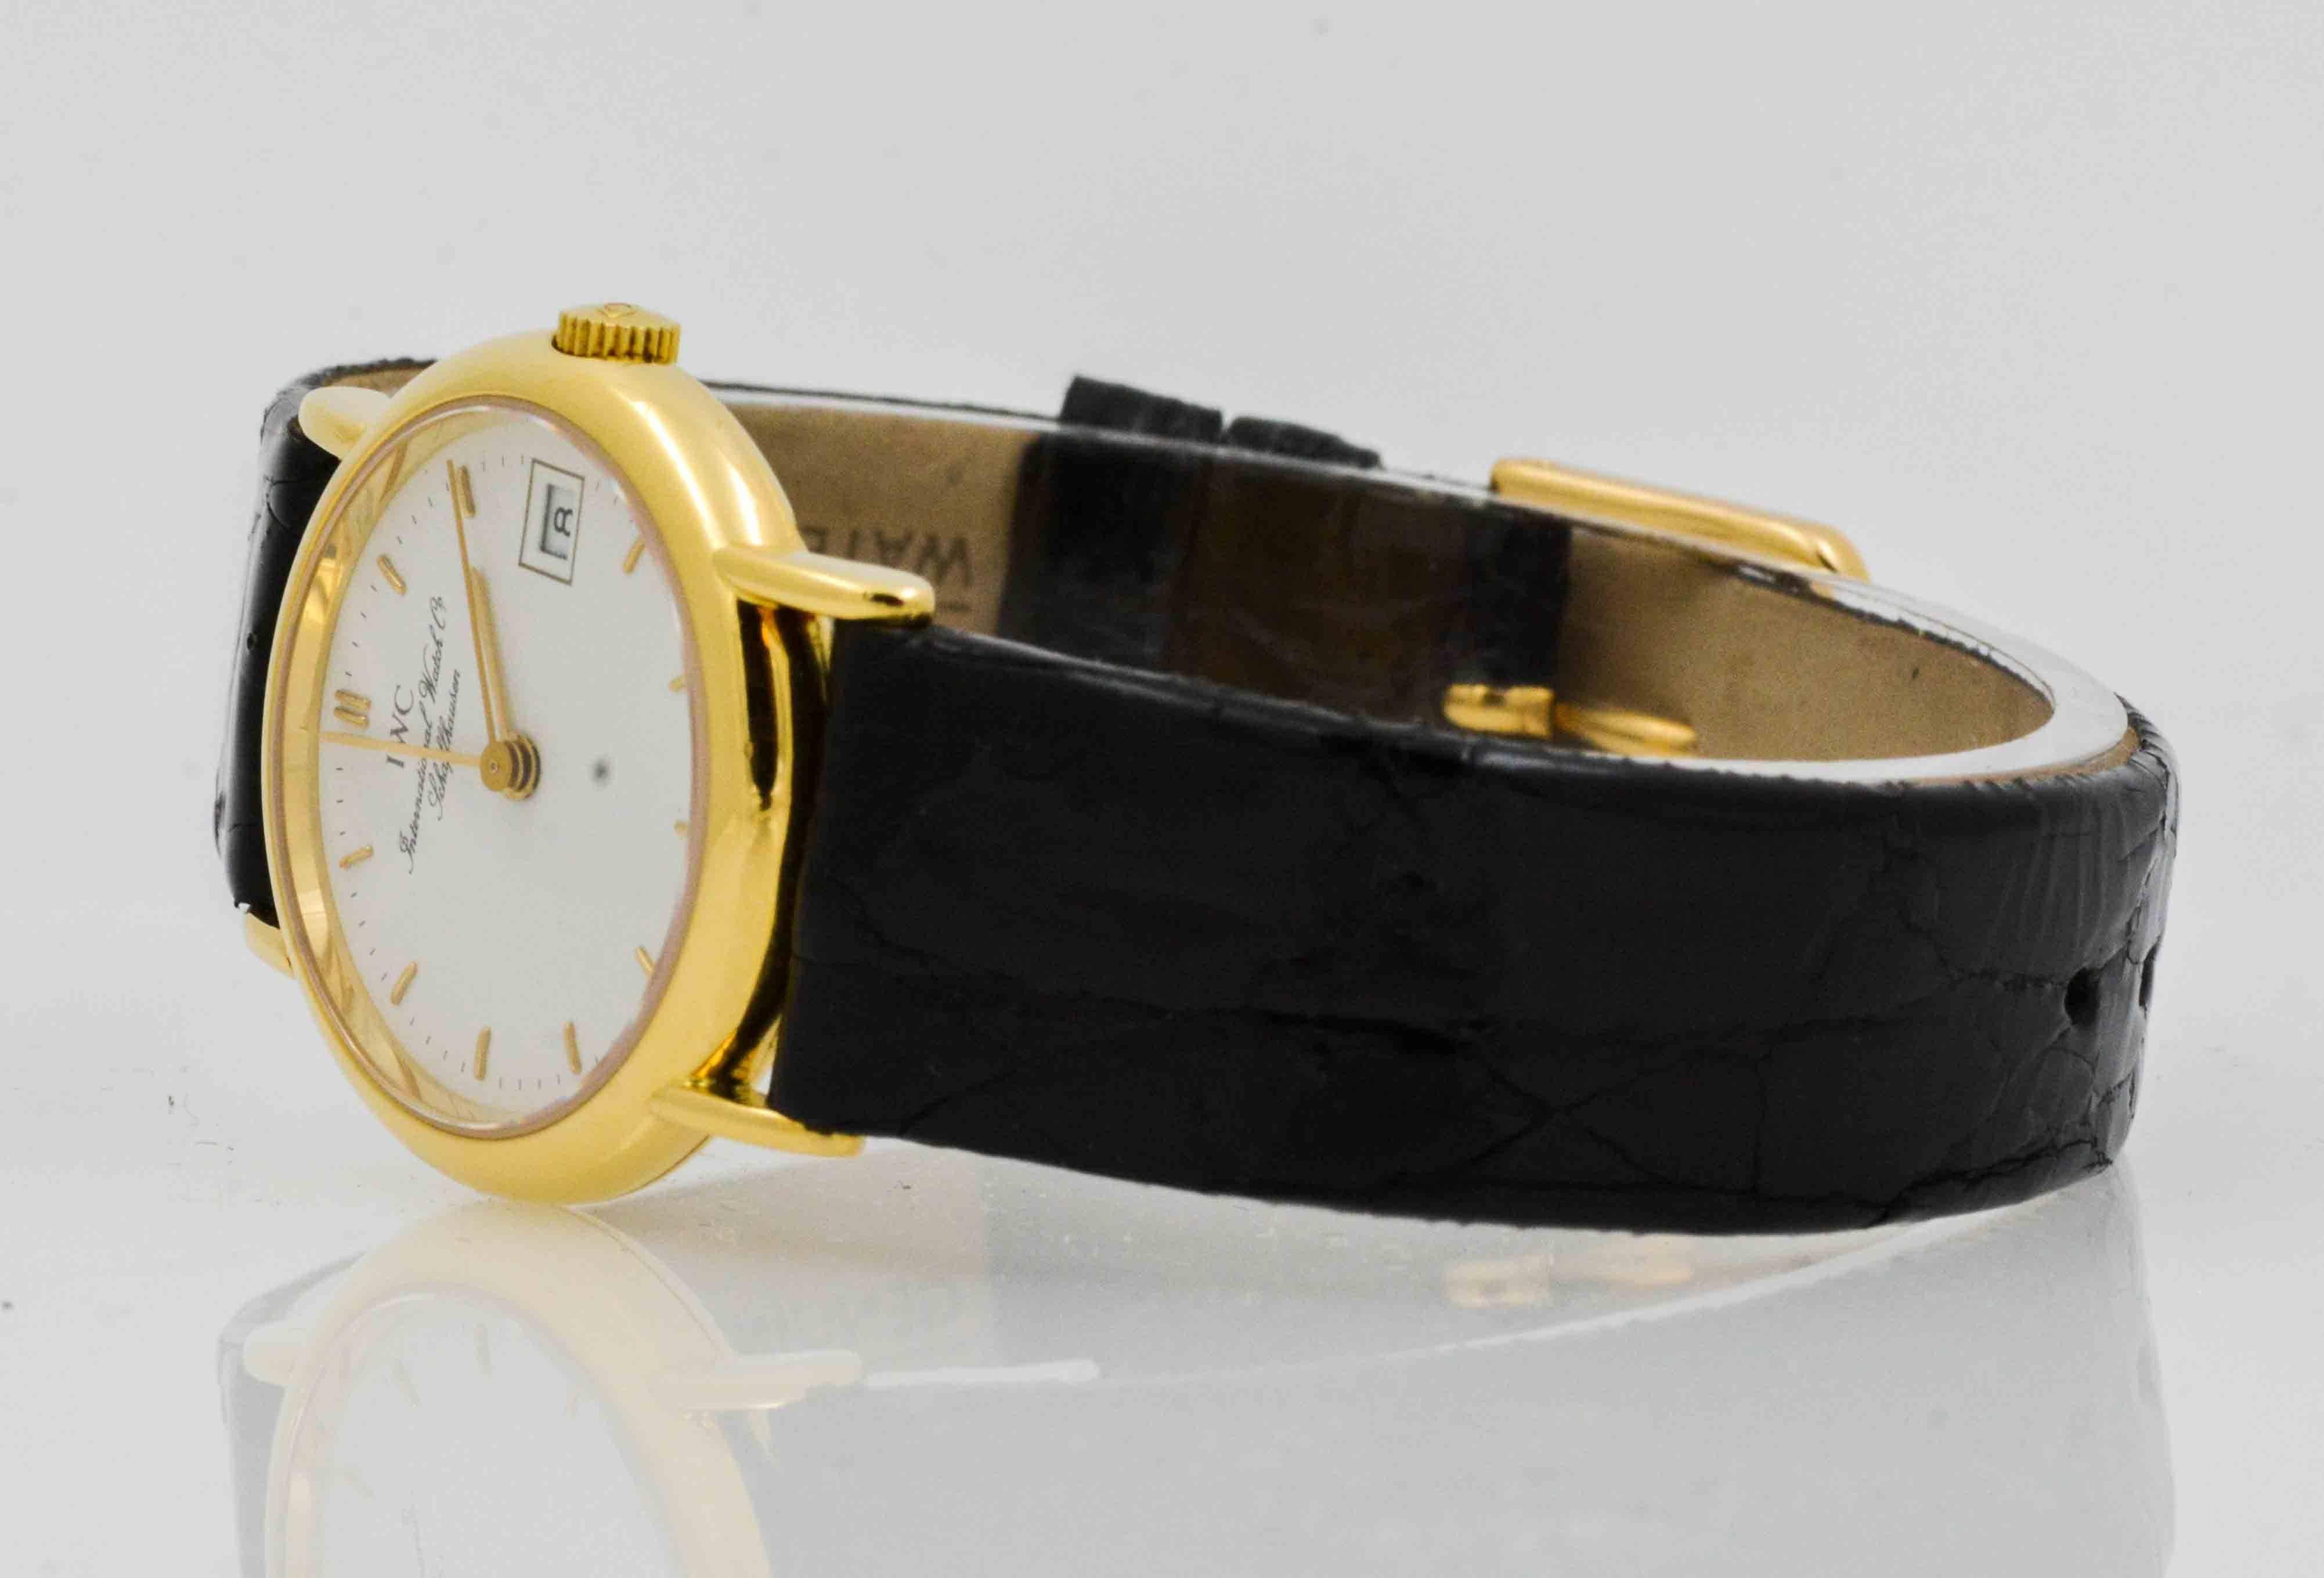 International Watch Company (IWC) 26 mm ladies watch in 18 Karat yellow gold with white index dial. Date, second hand, quartz movement. Black crocodile strap with Ardillion buckle. Certified pre-owned and recently serviced.